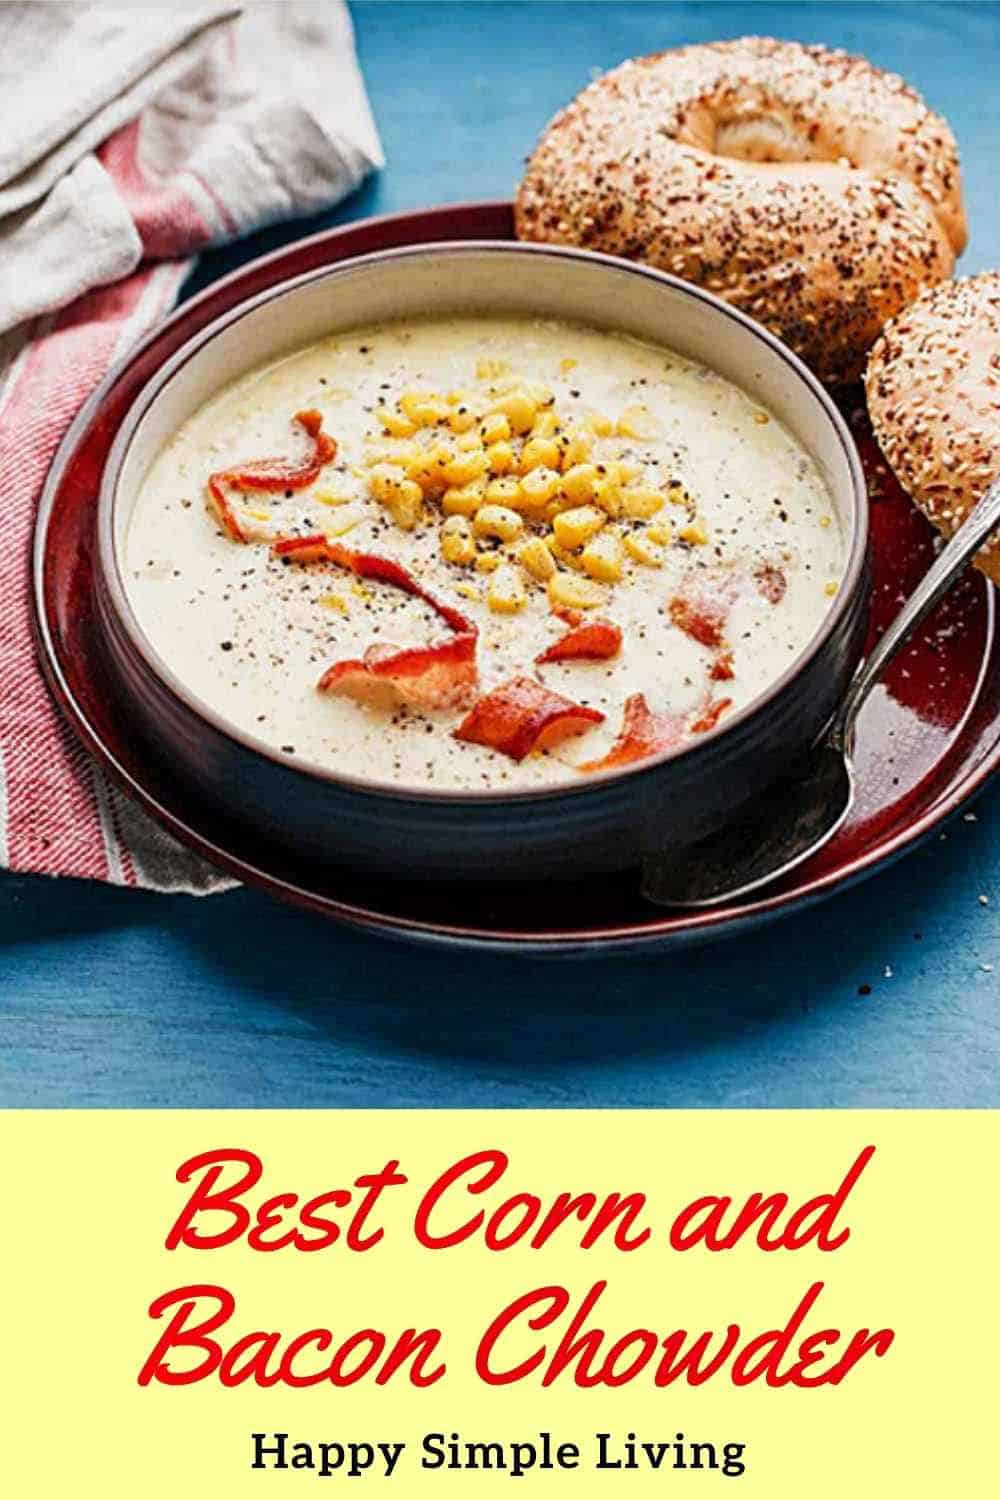 A bowl of corn chowder garnished with bacon, surrounded by toasted bagels on a plate.